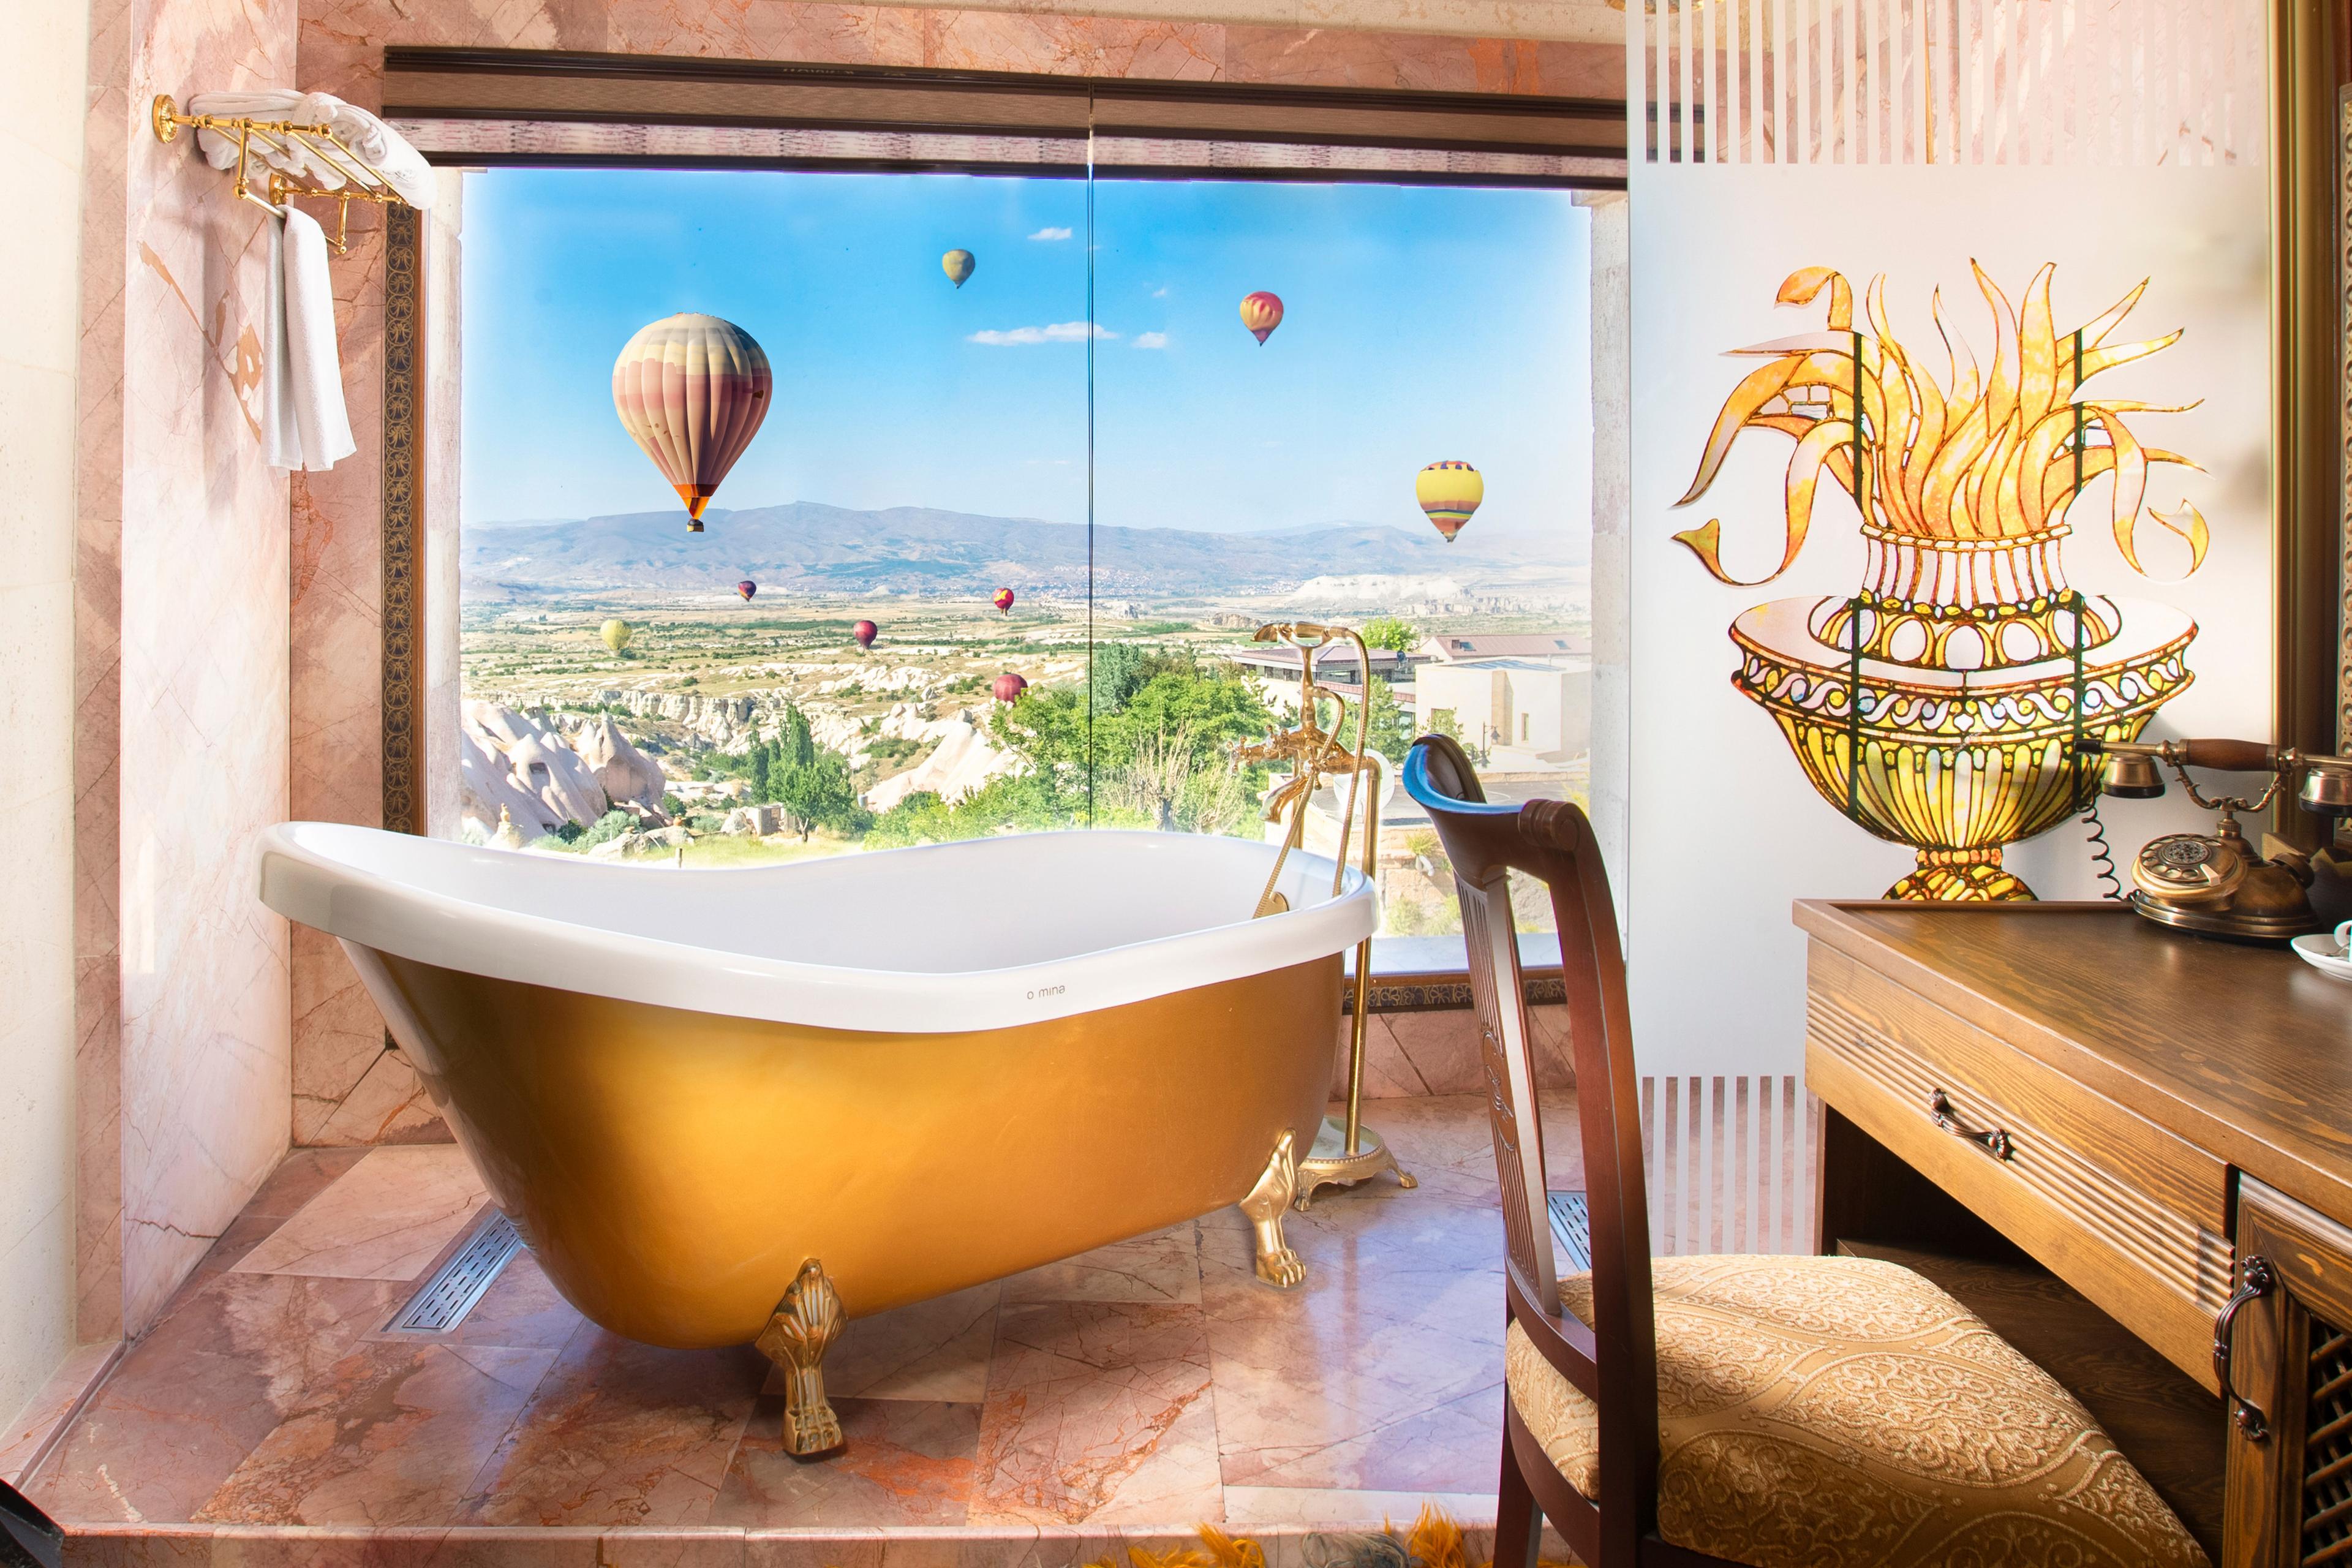 Luxury  Room with Balloon View